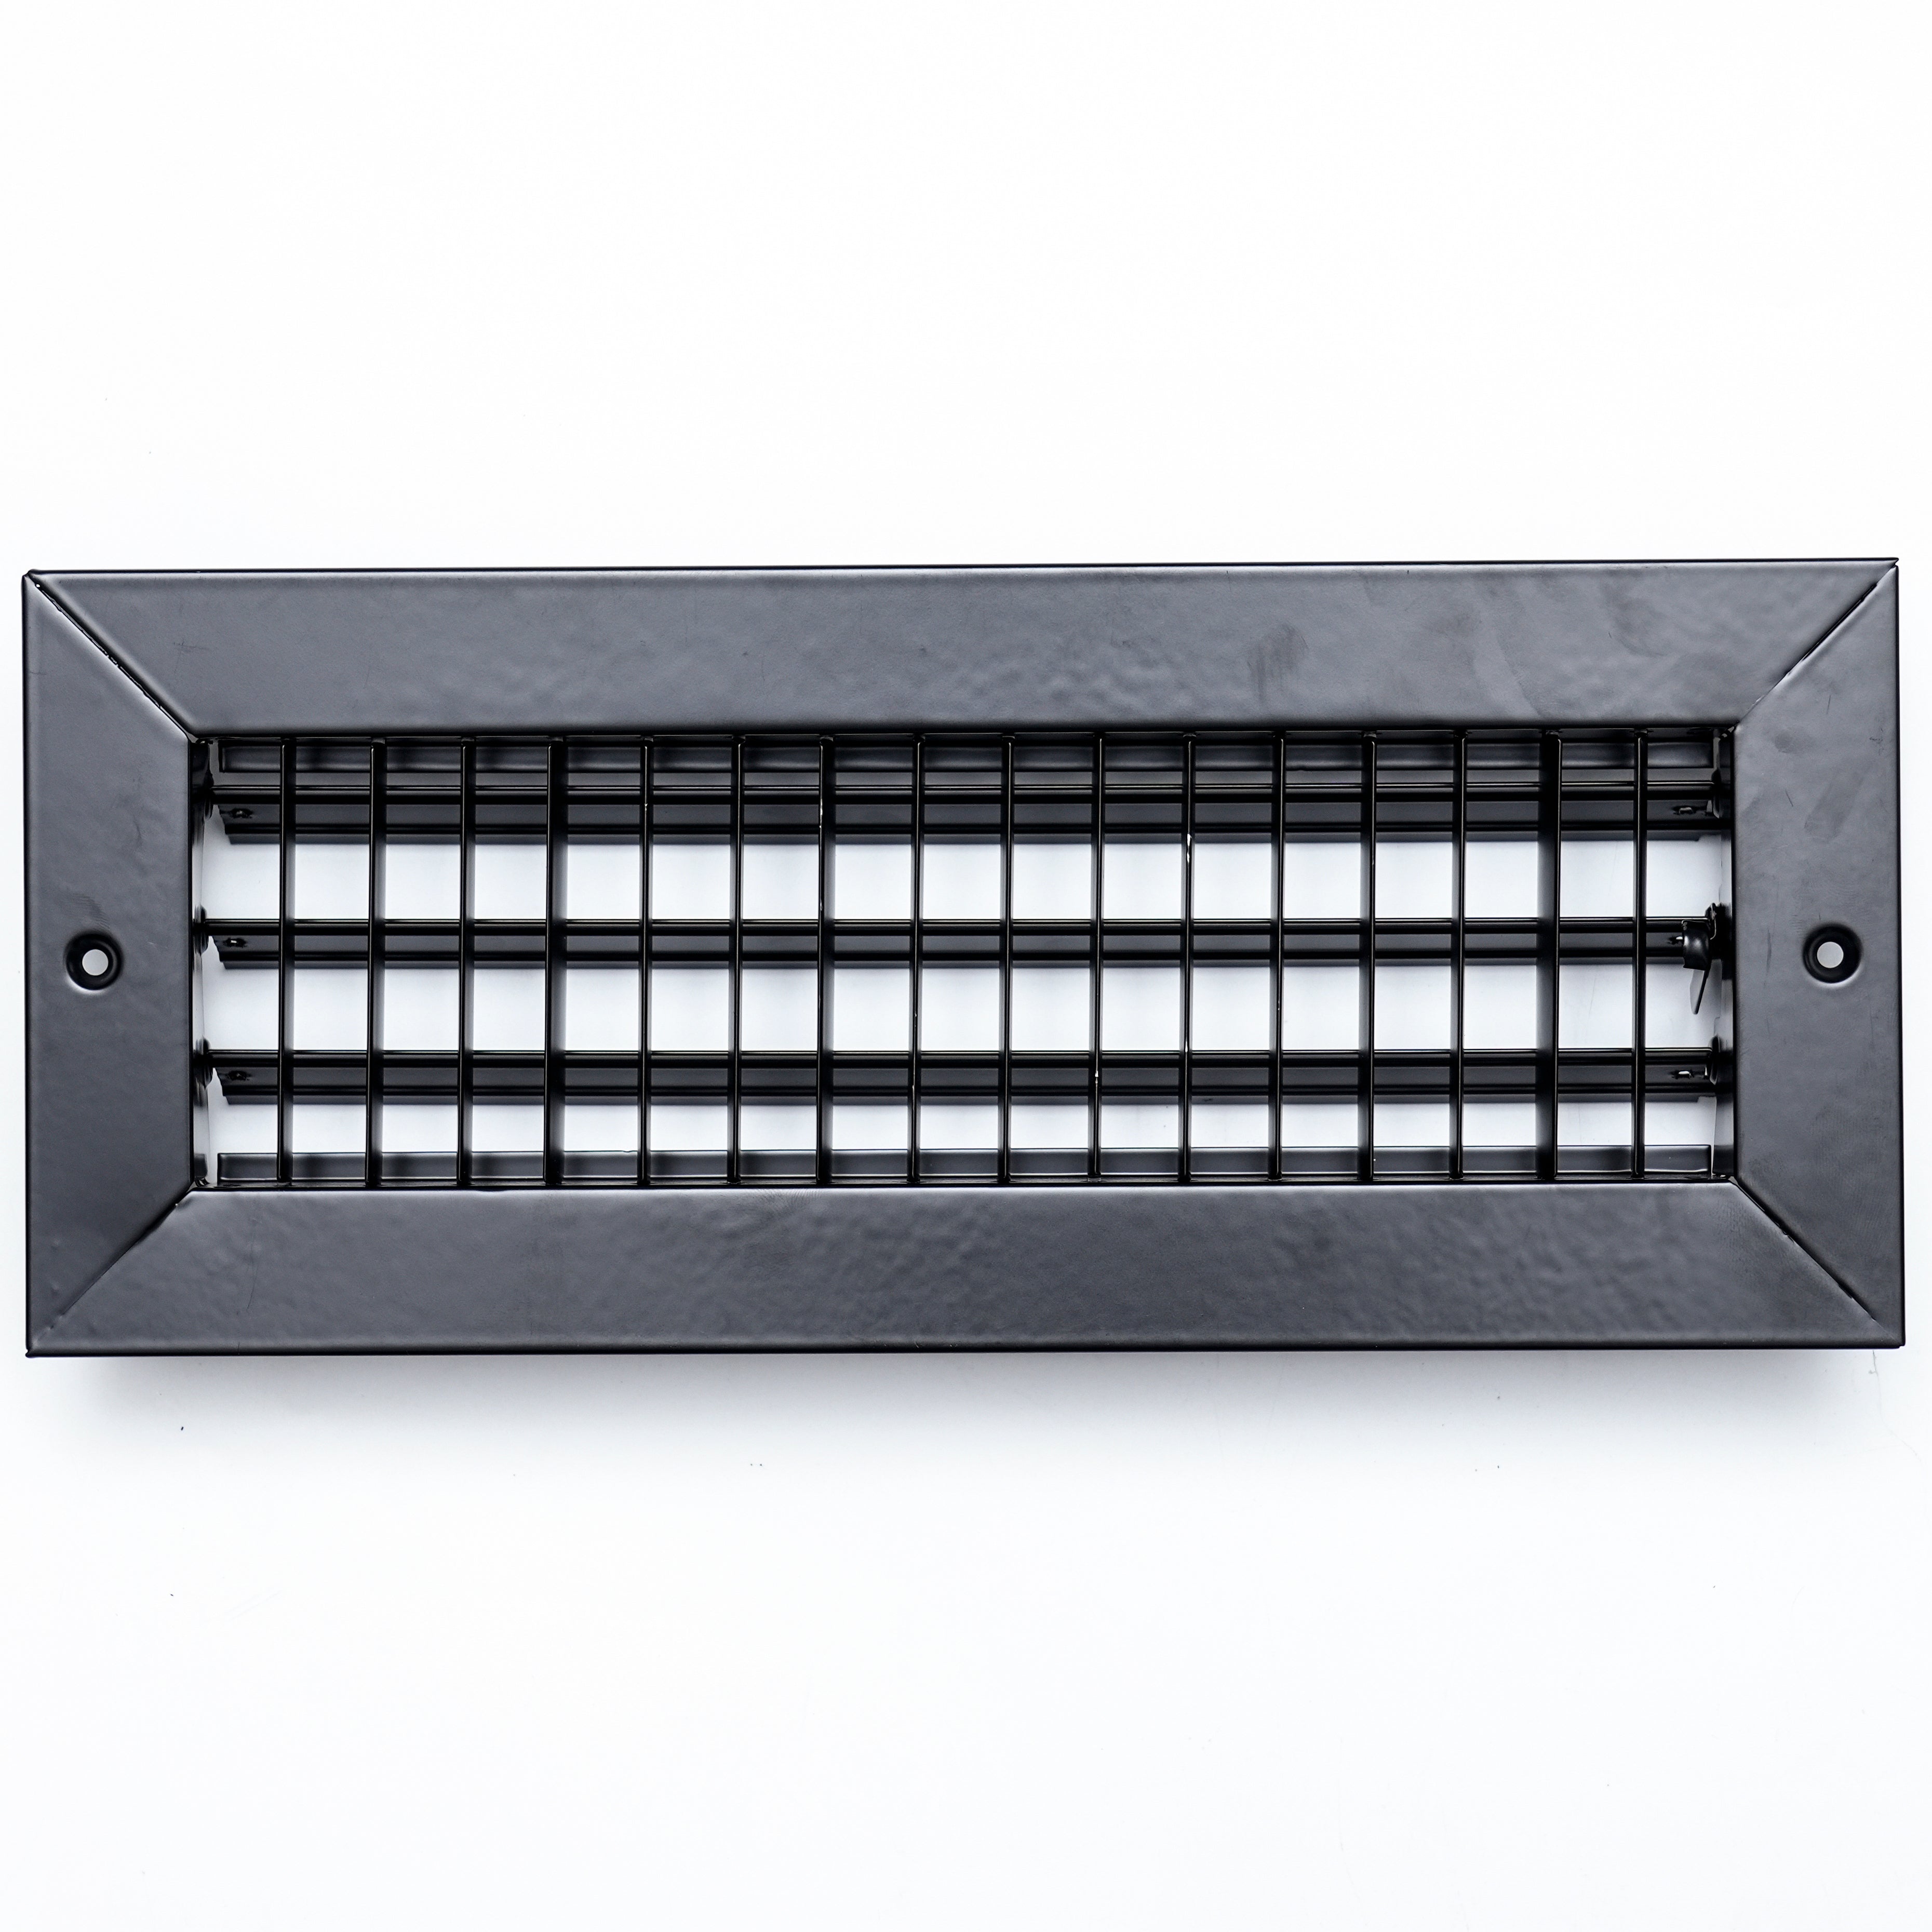 12"W x 4"H Steel Adjustable Air Supply Grille | Register Vent Cover Grill for Sidewall and Ceiling | Black | Outer Dimensions: 13.75"W X 5.75"H for 12x4 Duct Opening